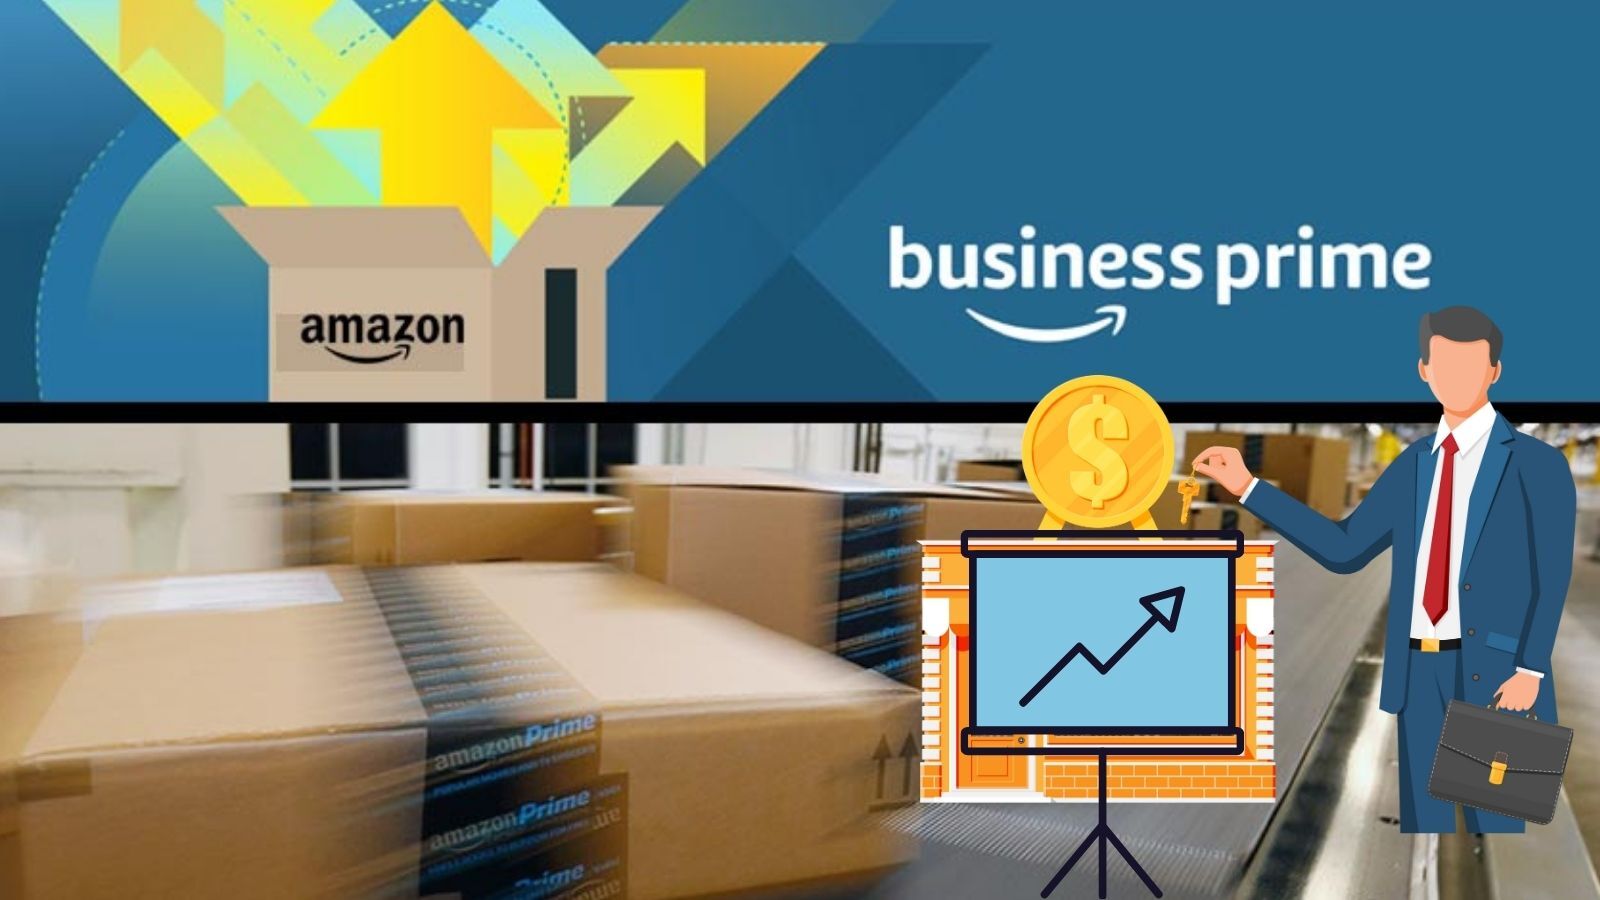 Amazon Prime Business Model (Something You're Interested In!)